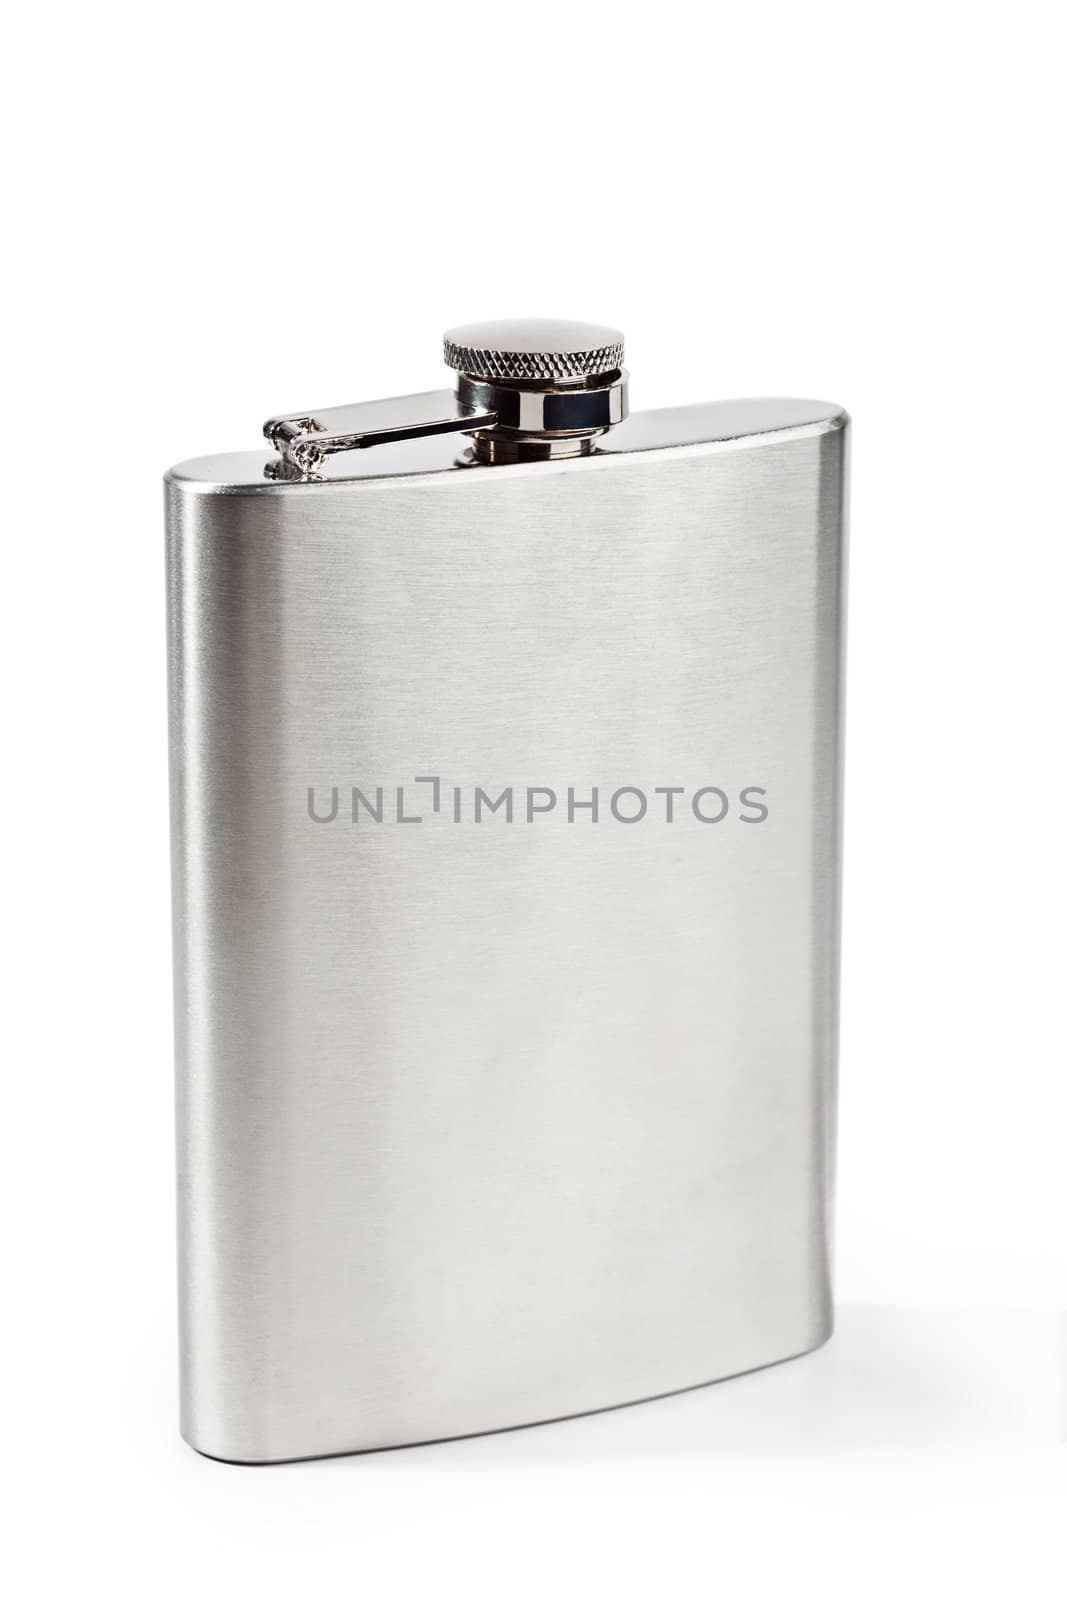 Stainless hip flask by dimol